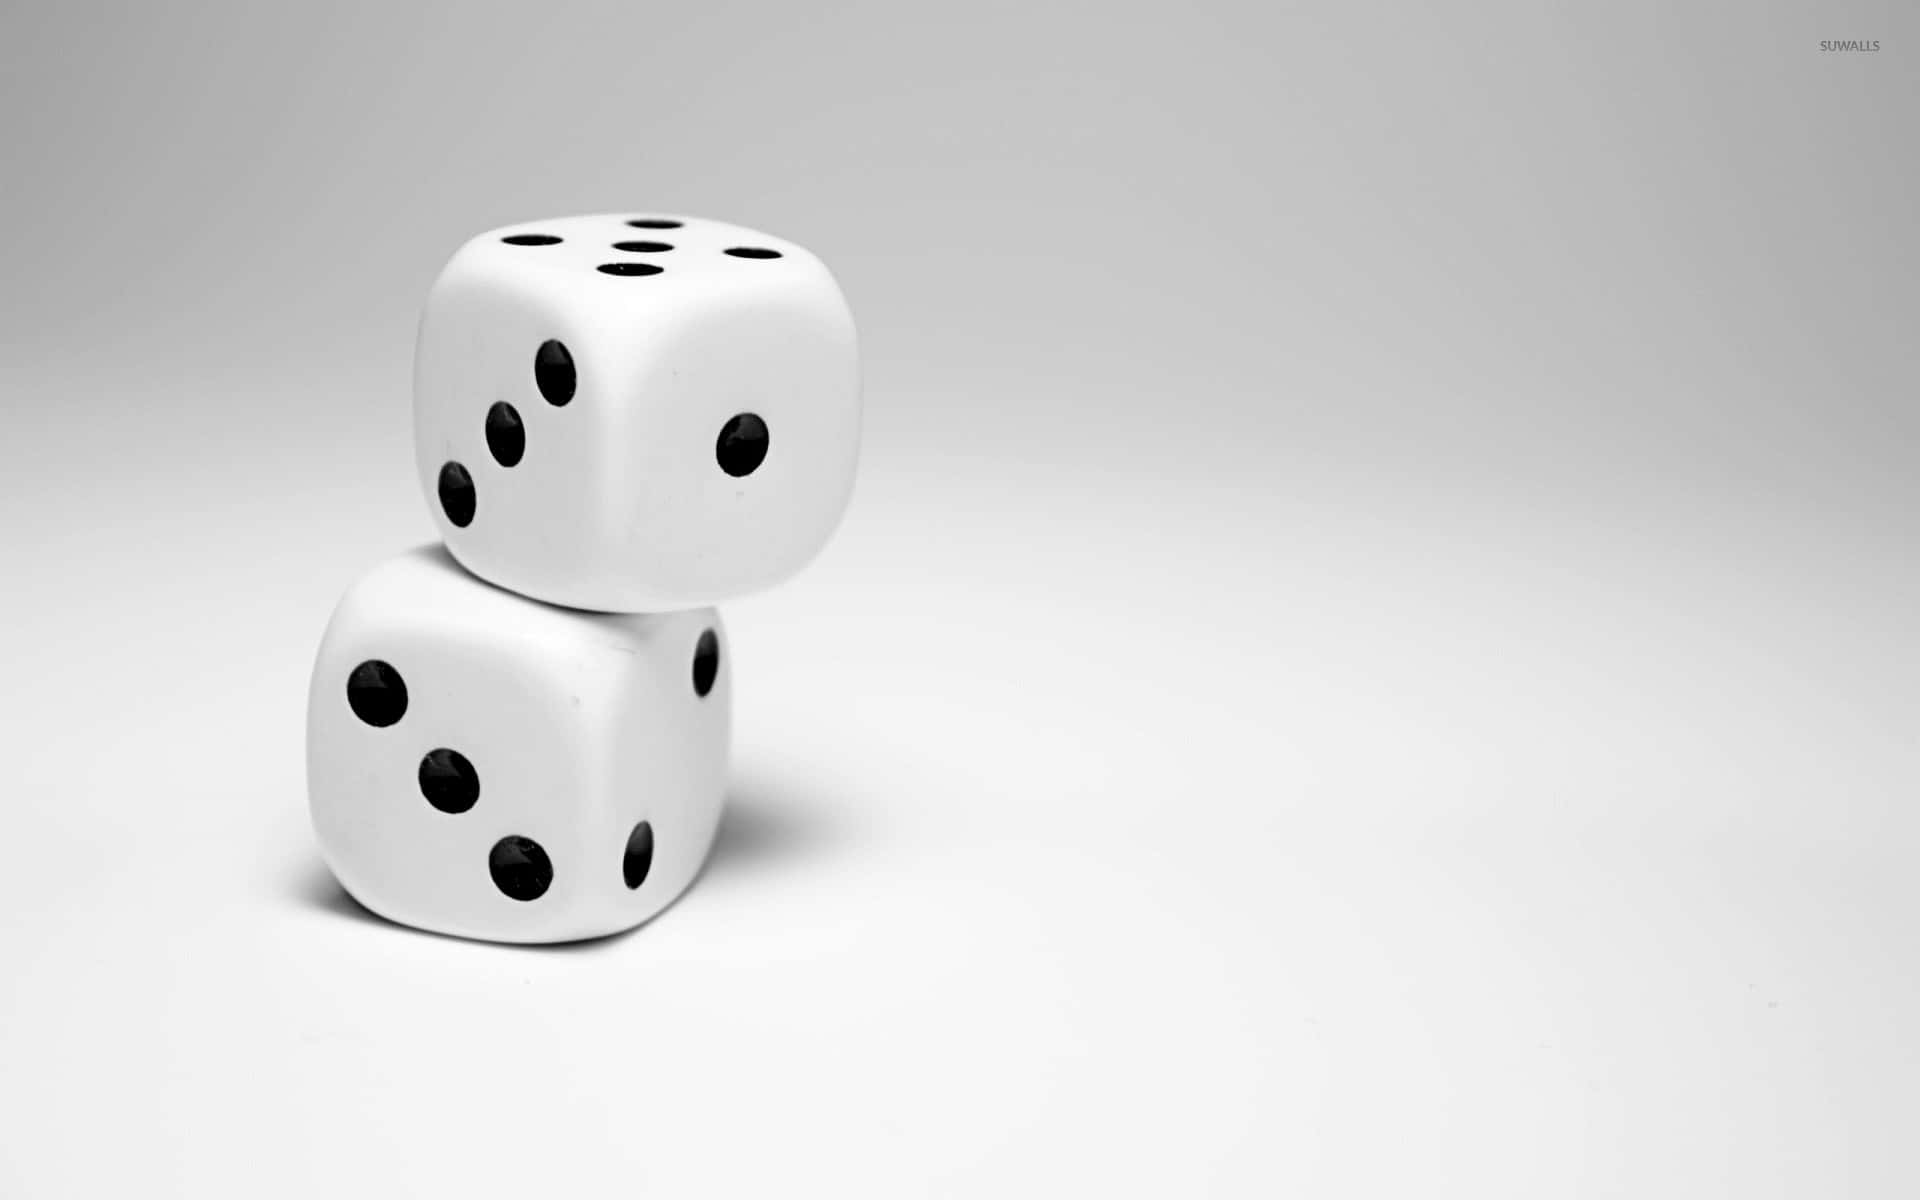 Stacked White Dice Gray Background.jpg